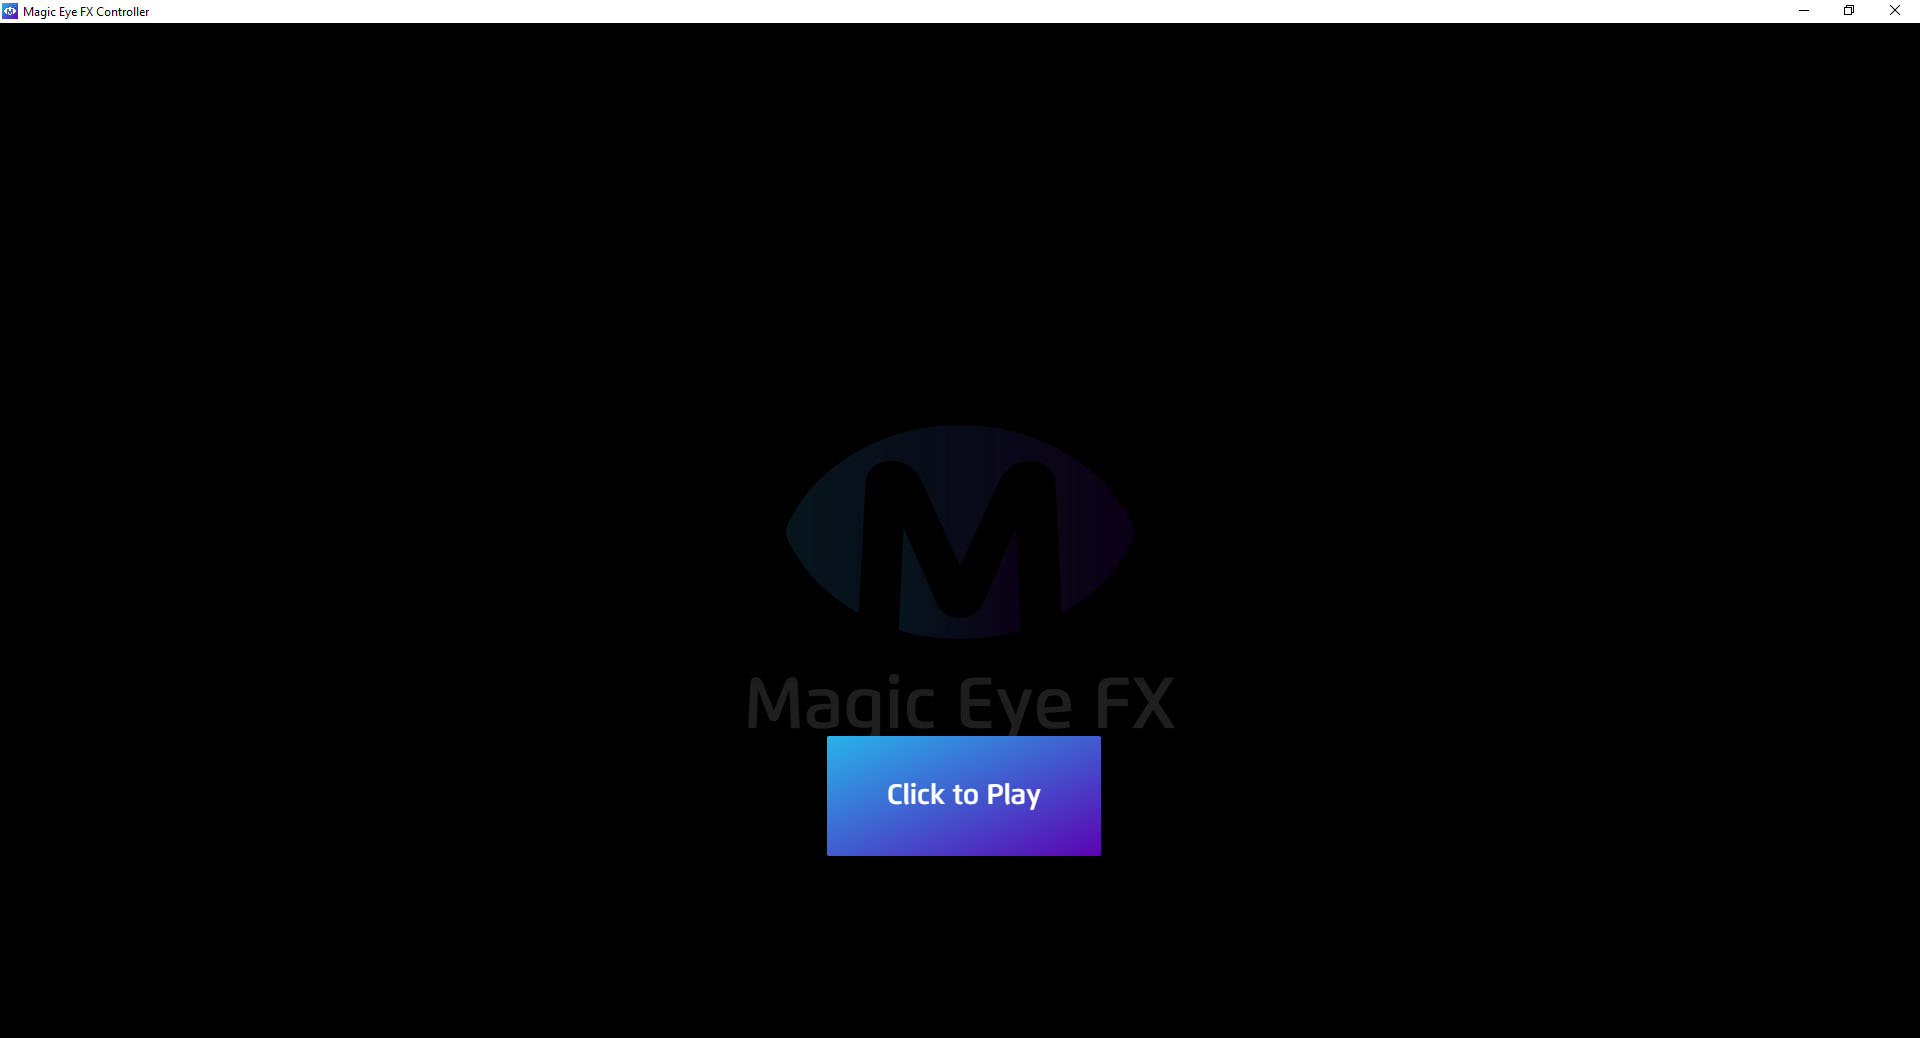 Magic Eye FX Software Click to Play